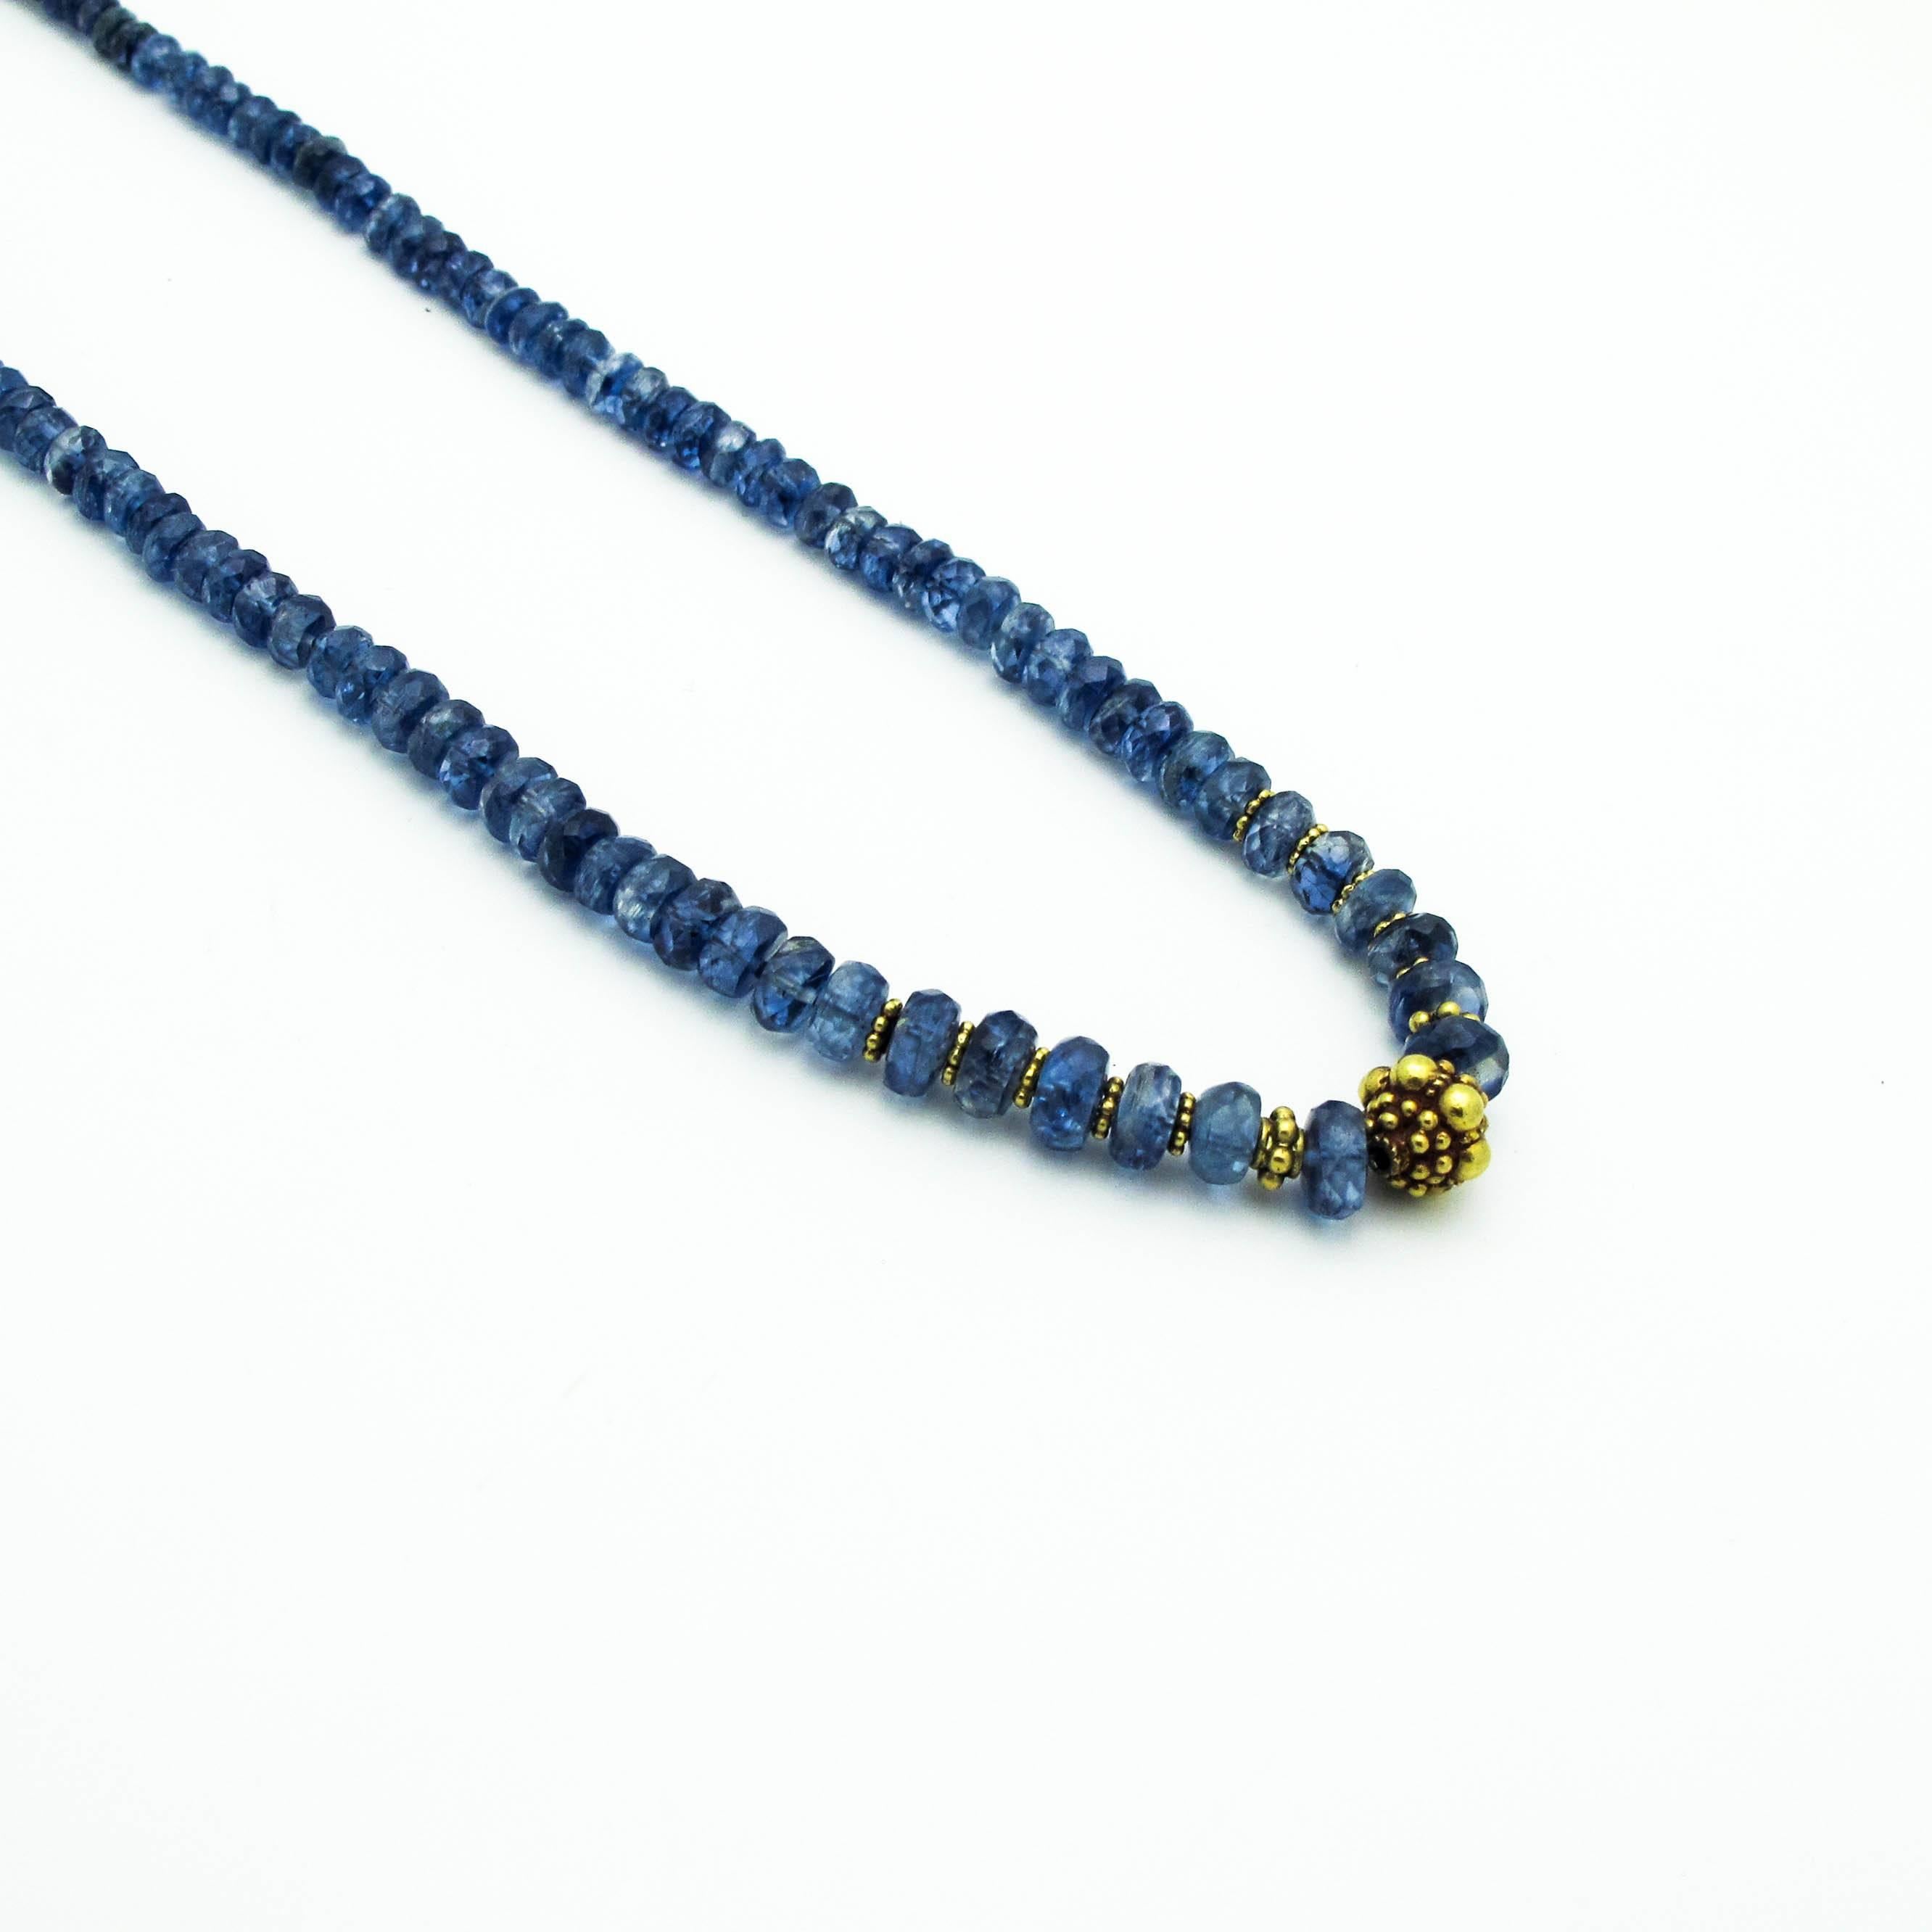 Beautiful deep watery blue kyanite faceted beads with glistening 18k spacers. Adjustable length and graduated beads. Looks great worn alone or layered with other pieces. A simple yet elegant design great for everyday use or special occasion.